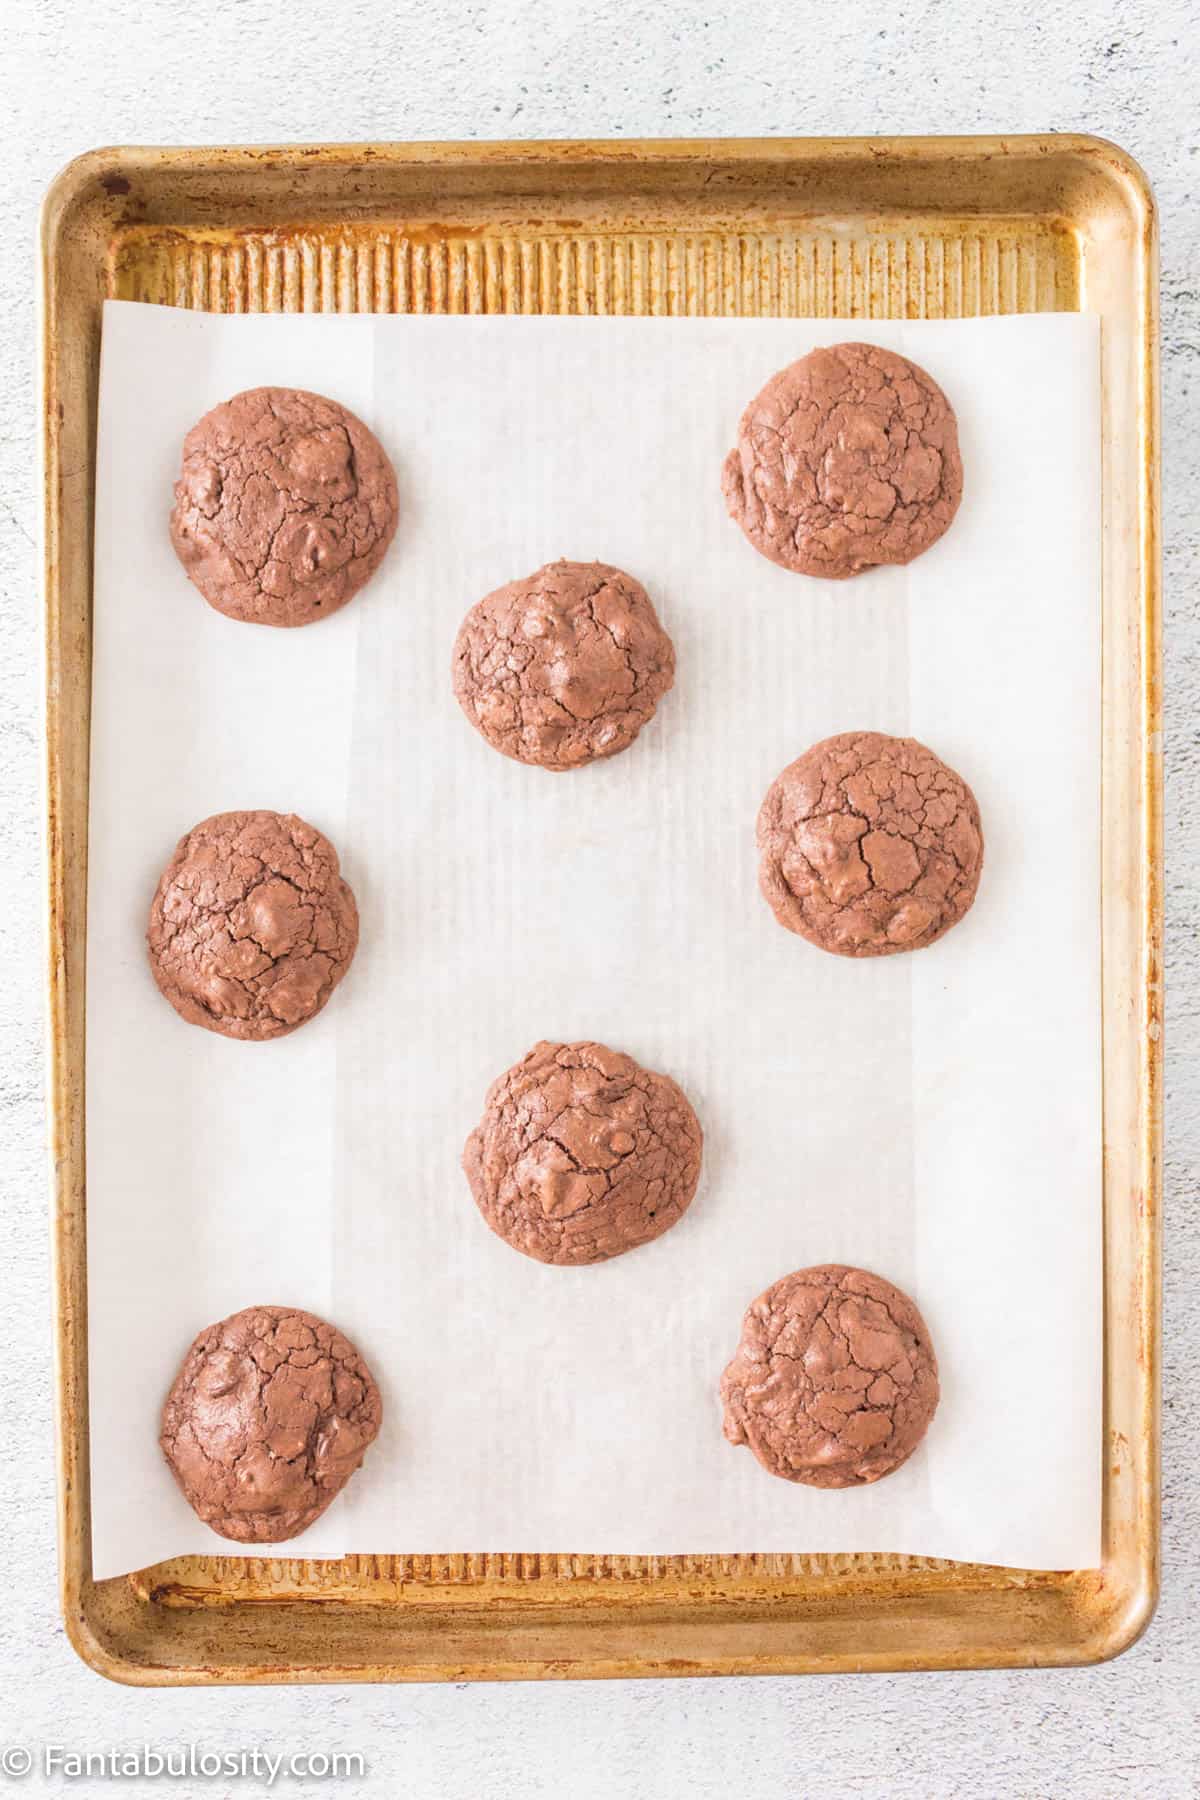 Let cookies cool on the pan for 2-3 minutes.